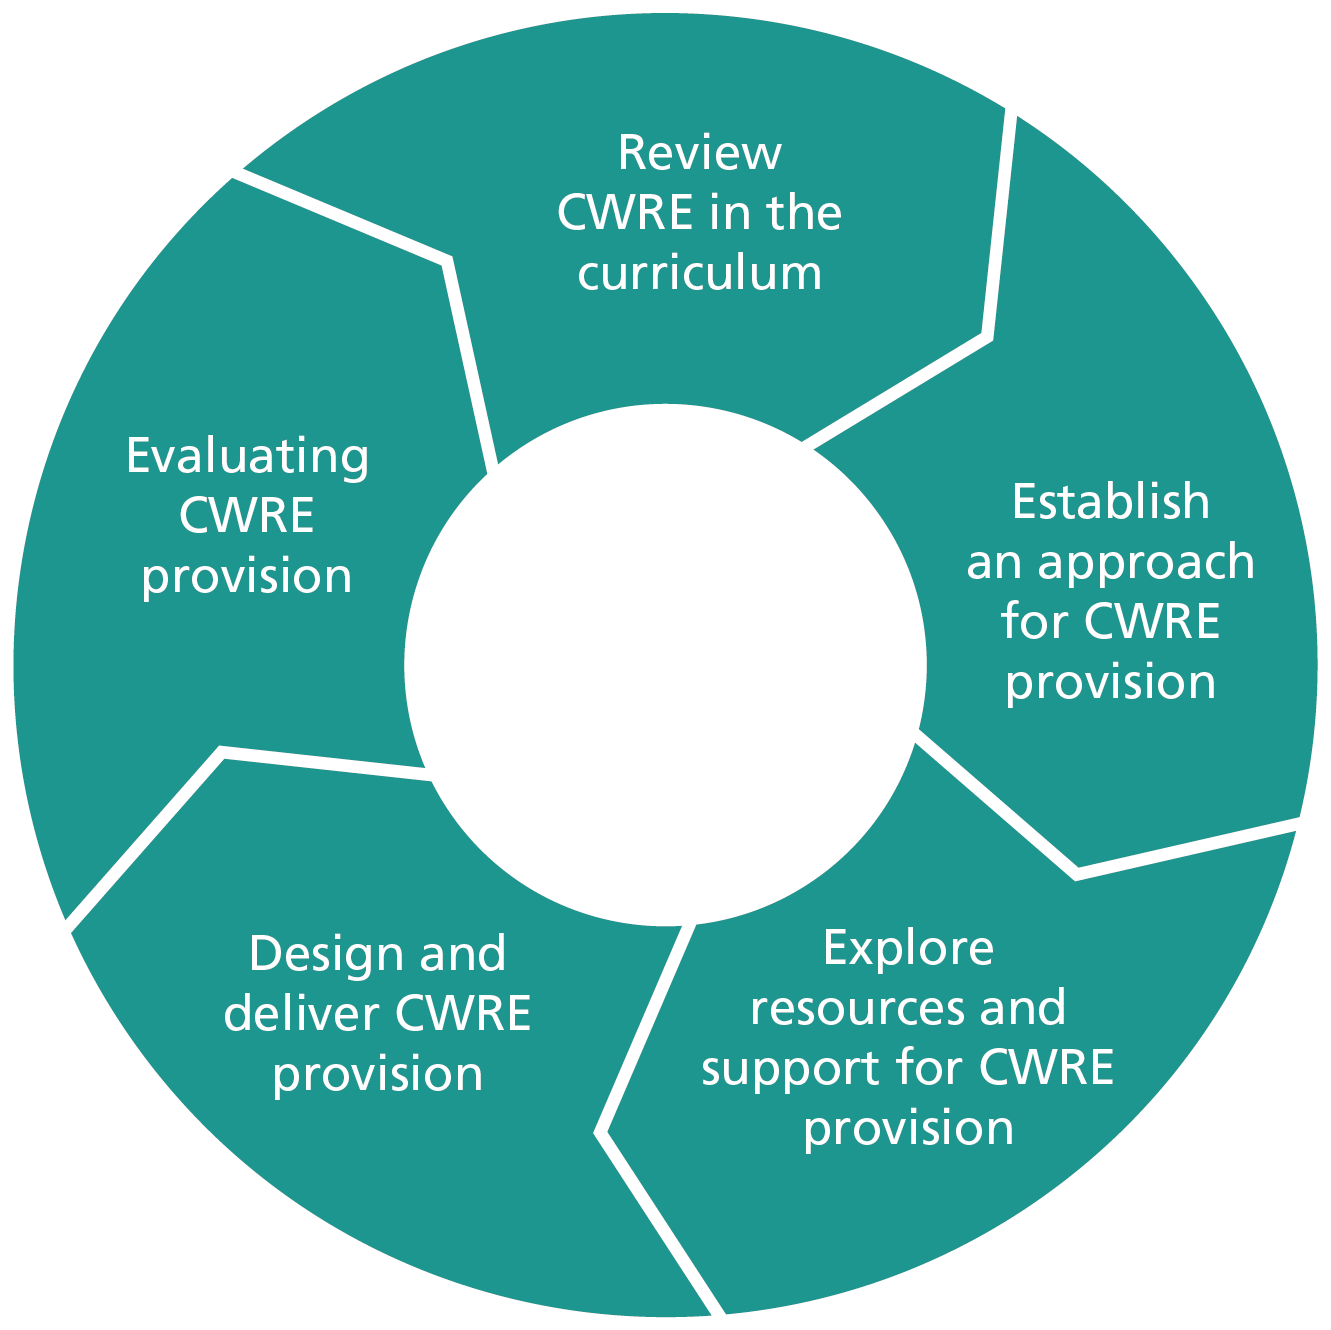 The process of integrating CWRE for schools and settings as they realise their curriculum.